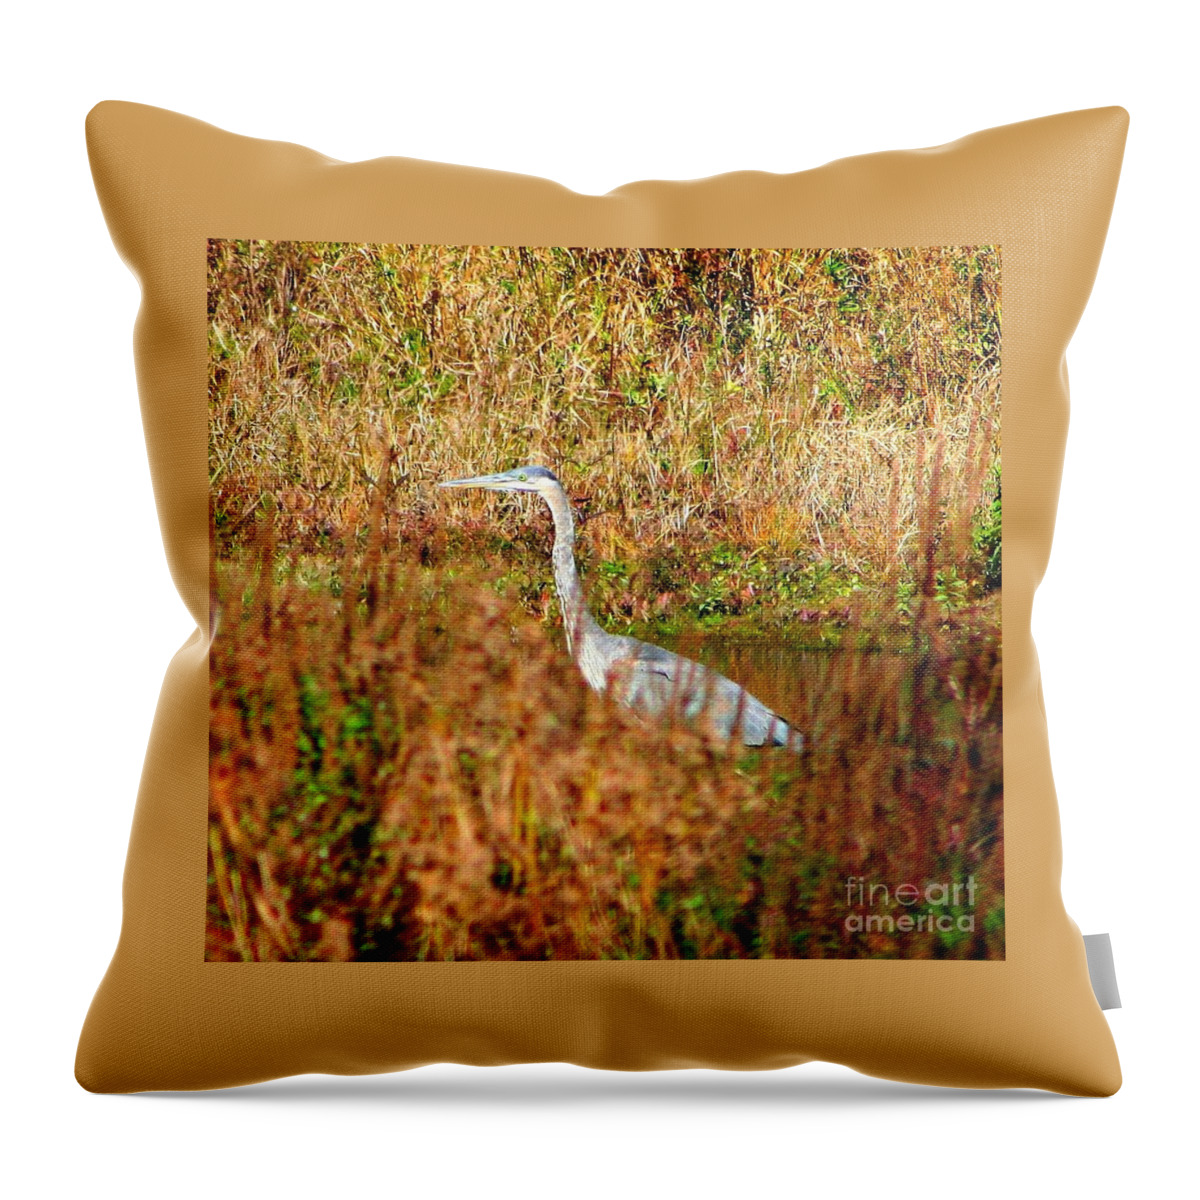 Bird Throw Pillow featuring the photograph Blue Heron In New Hampshire by Barbara S Nickerson